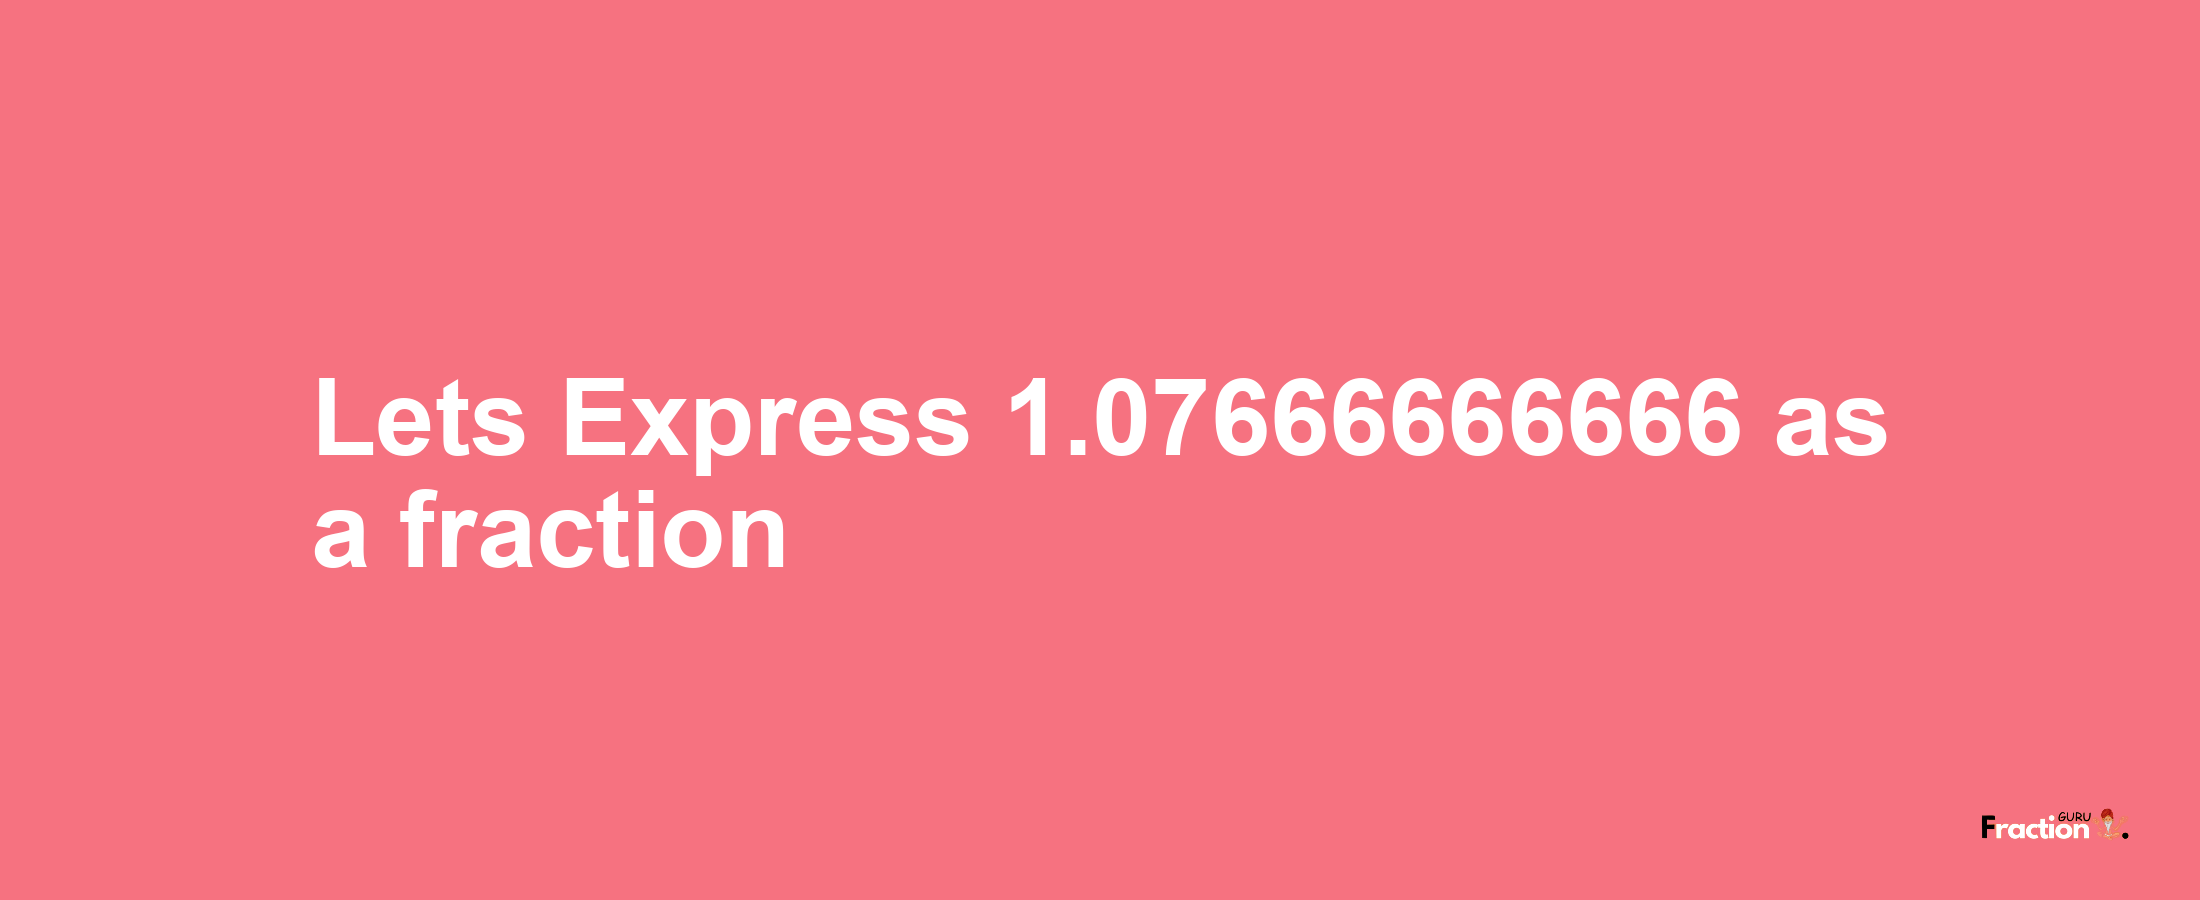 Lets Express 1.07666666666 as afraction